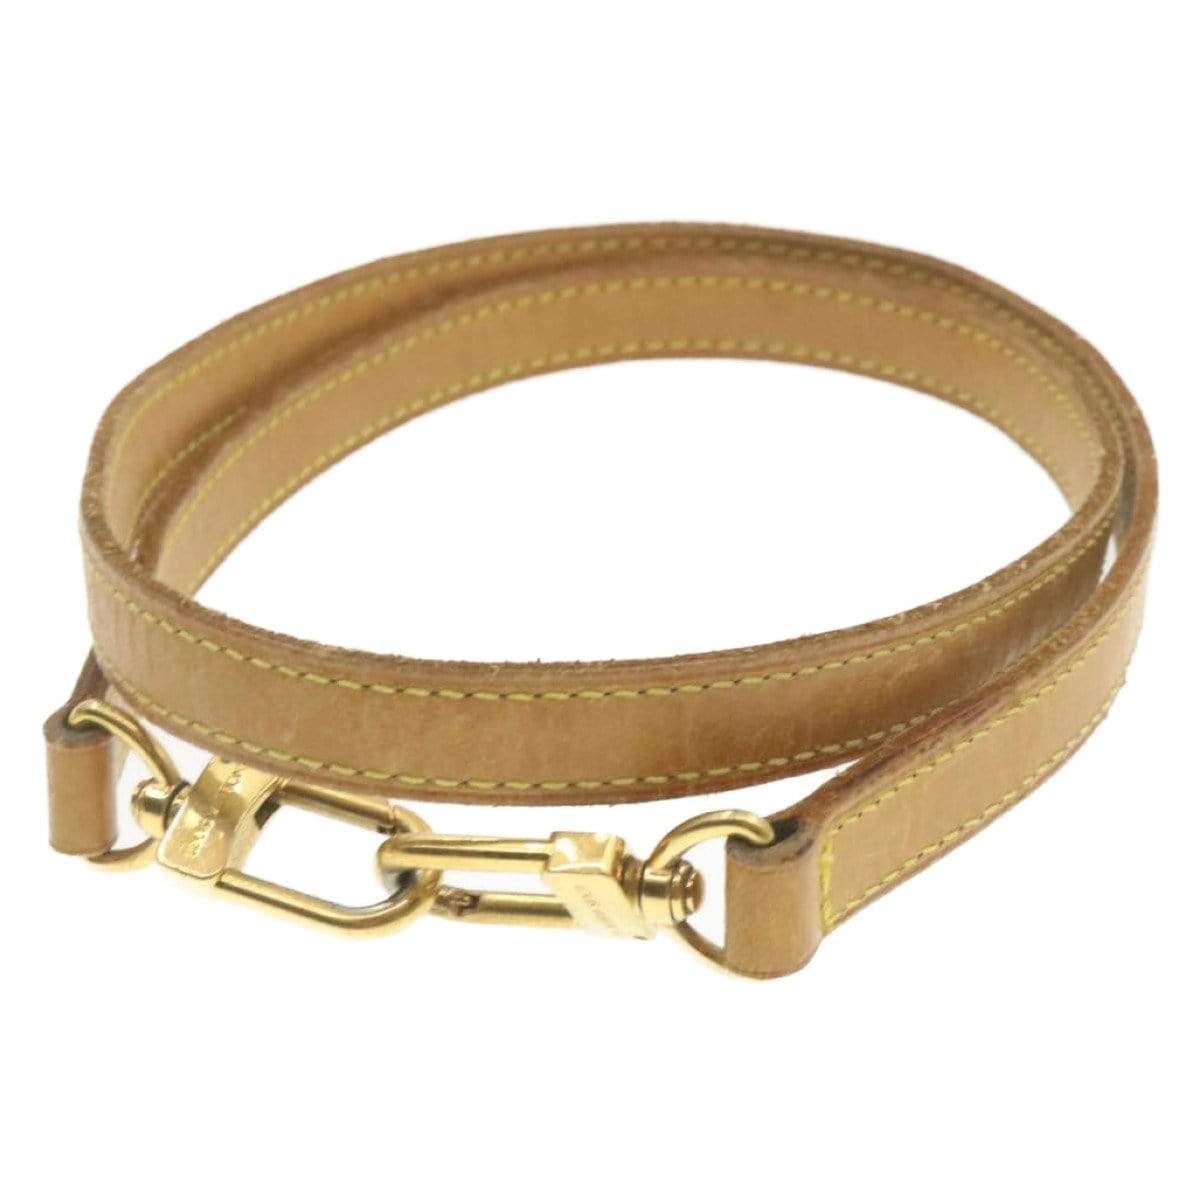 Dark Tan Leather Strap with Yellow Stitching for Louis Vuitton, Coach &  More - .75 Standard Width